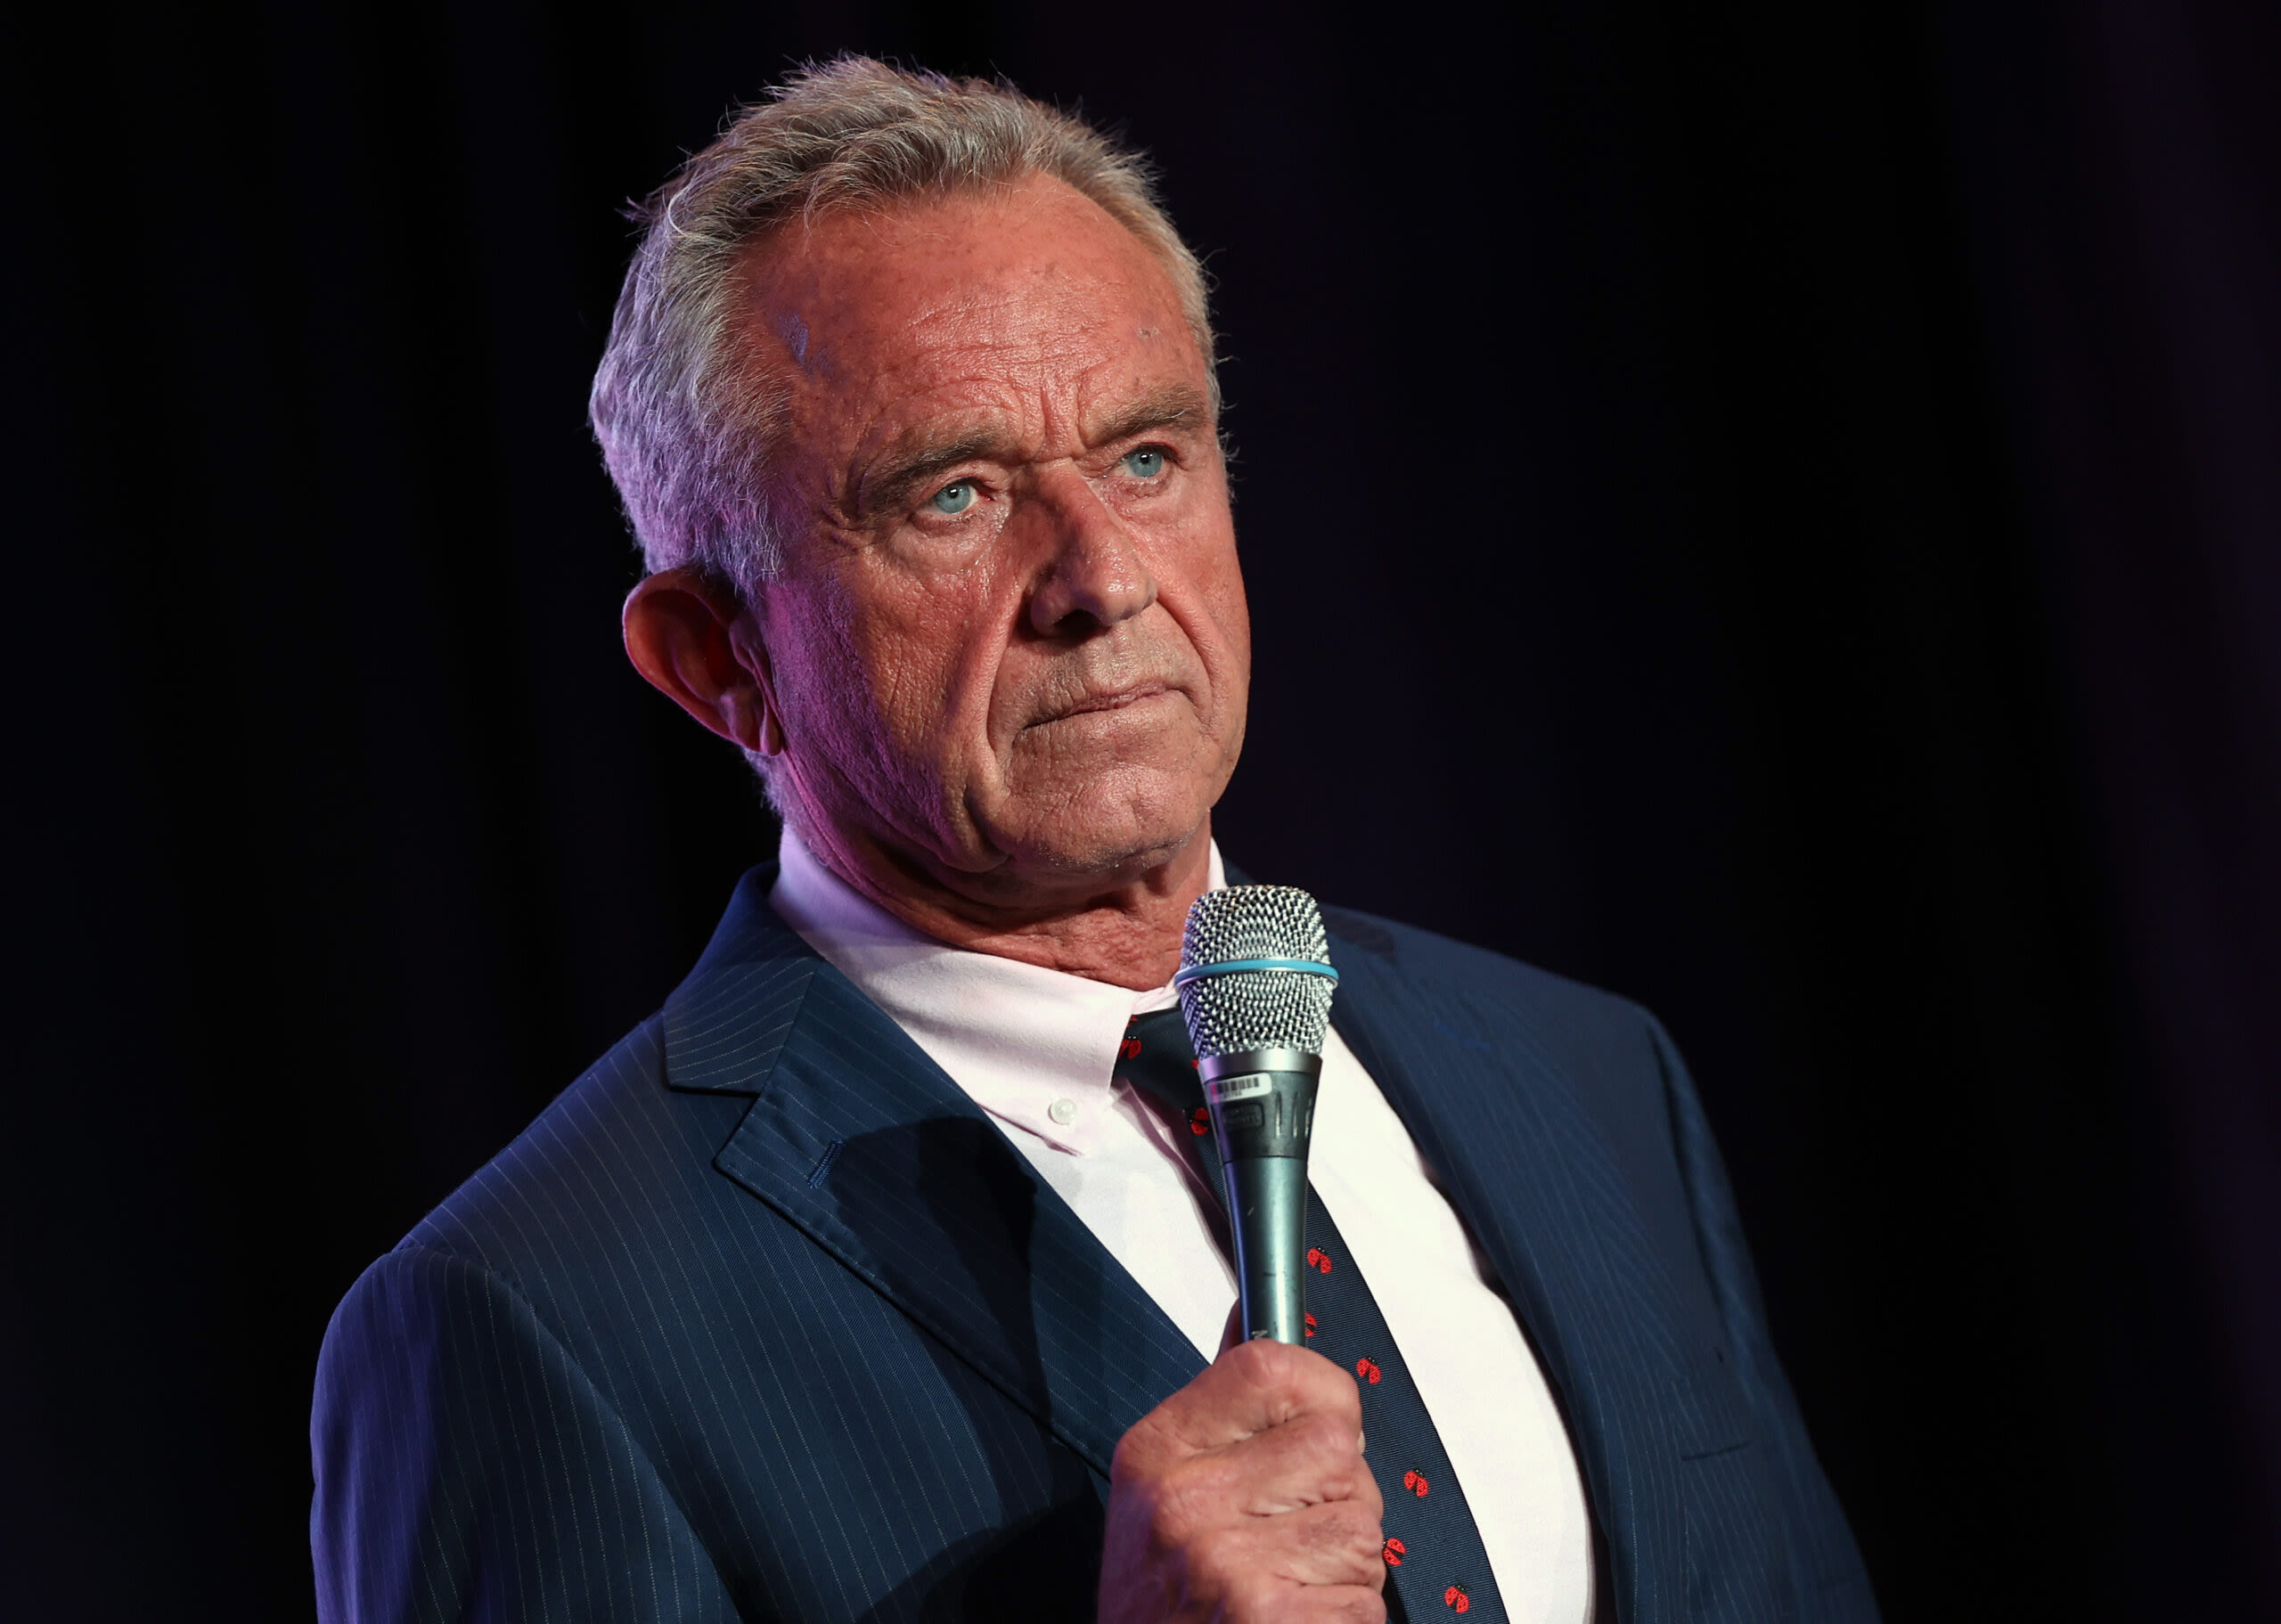 Trump, RFK Jr. Stoke Anti-Vax Conspiracies in Call Leaked by Kennedy’s Son